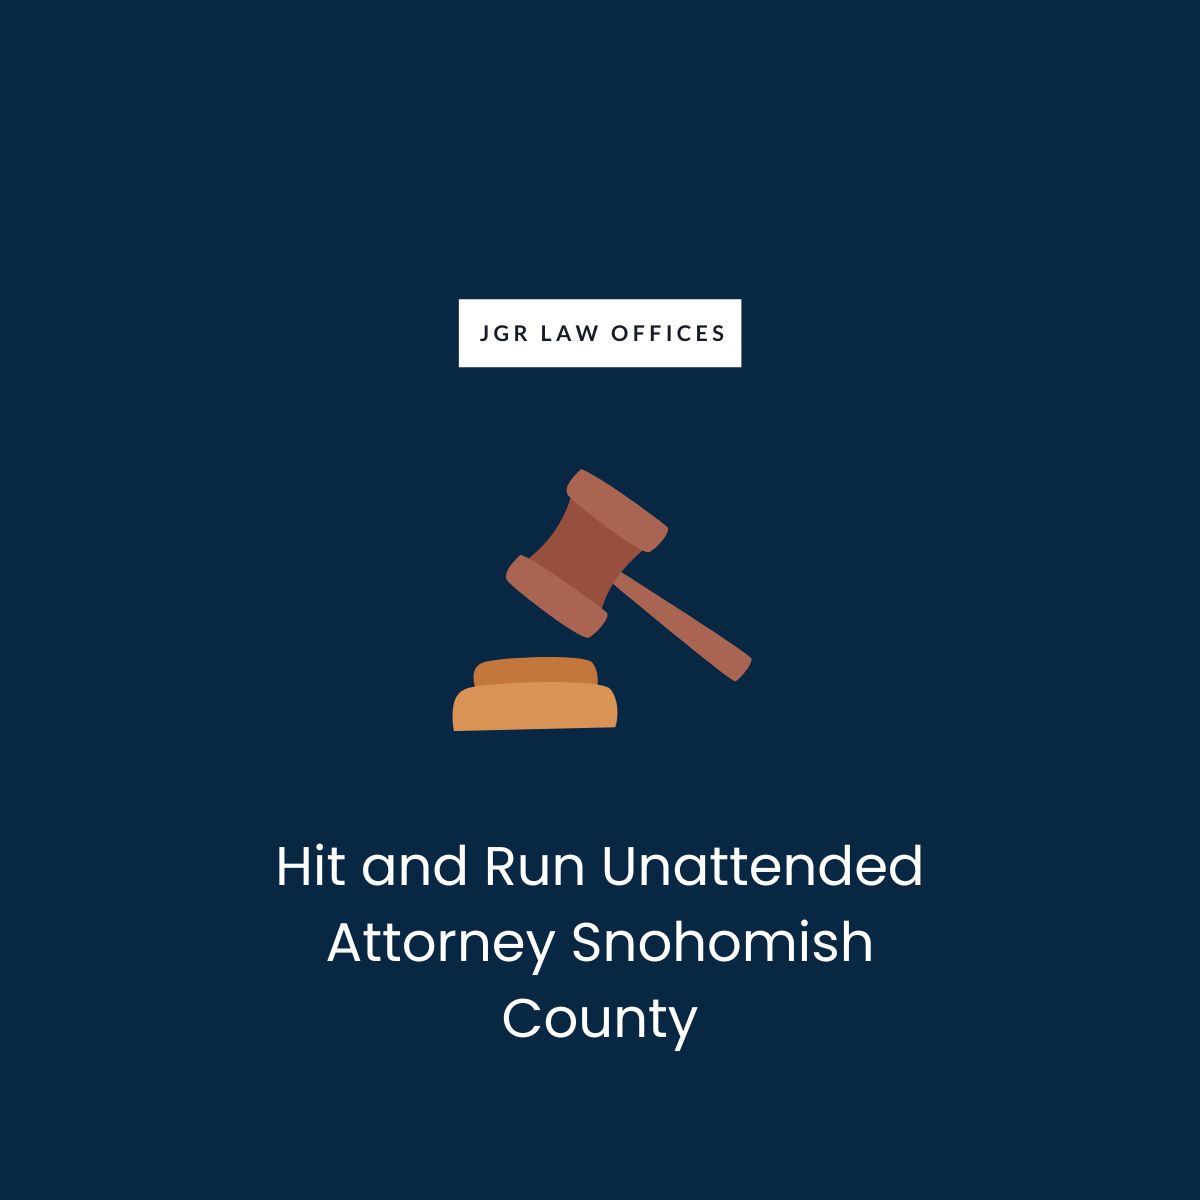 Hit and Run Unattended Attorney Snohomish County